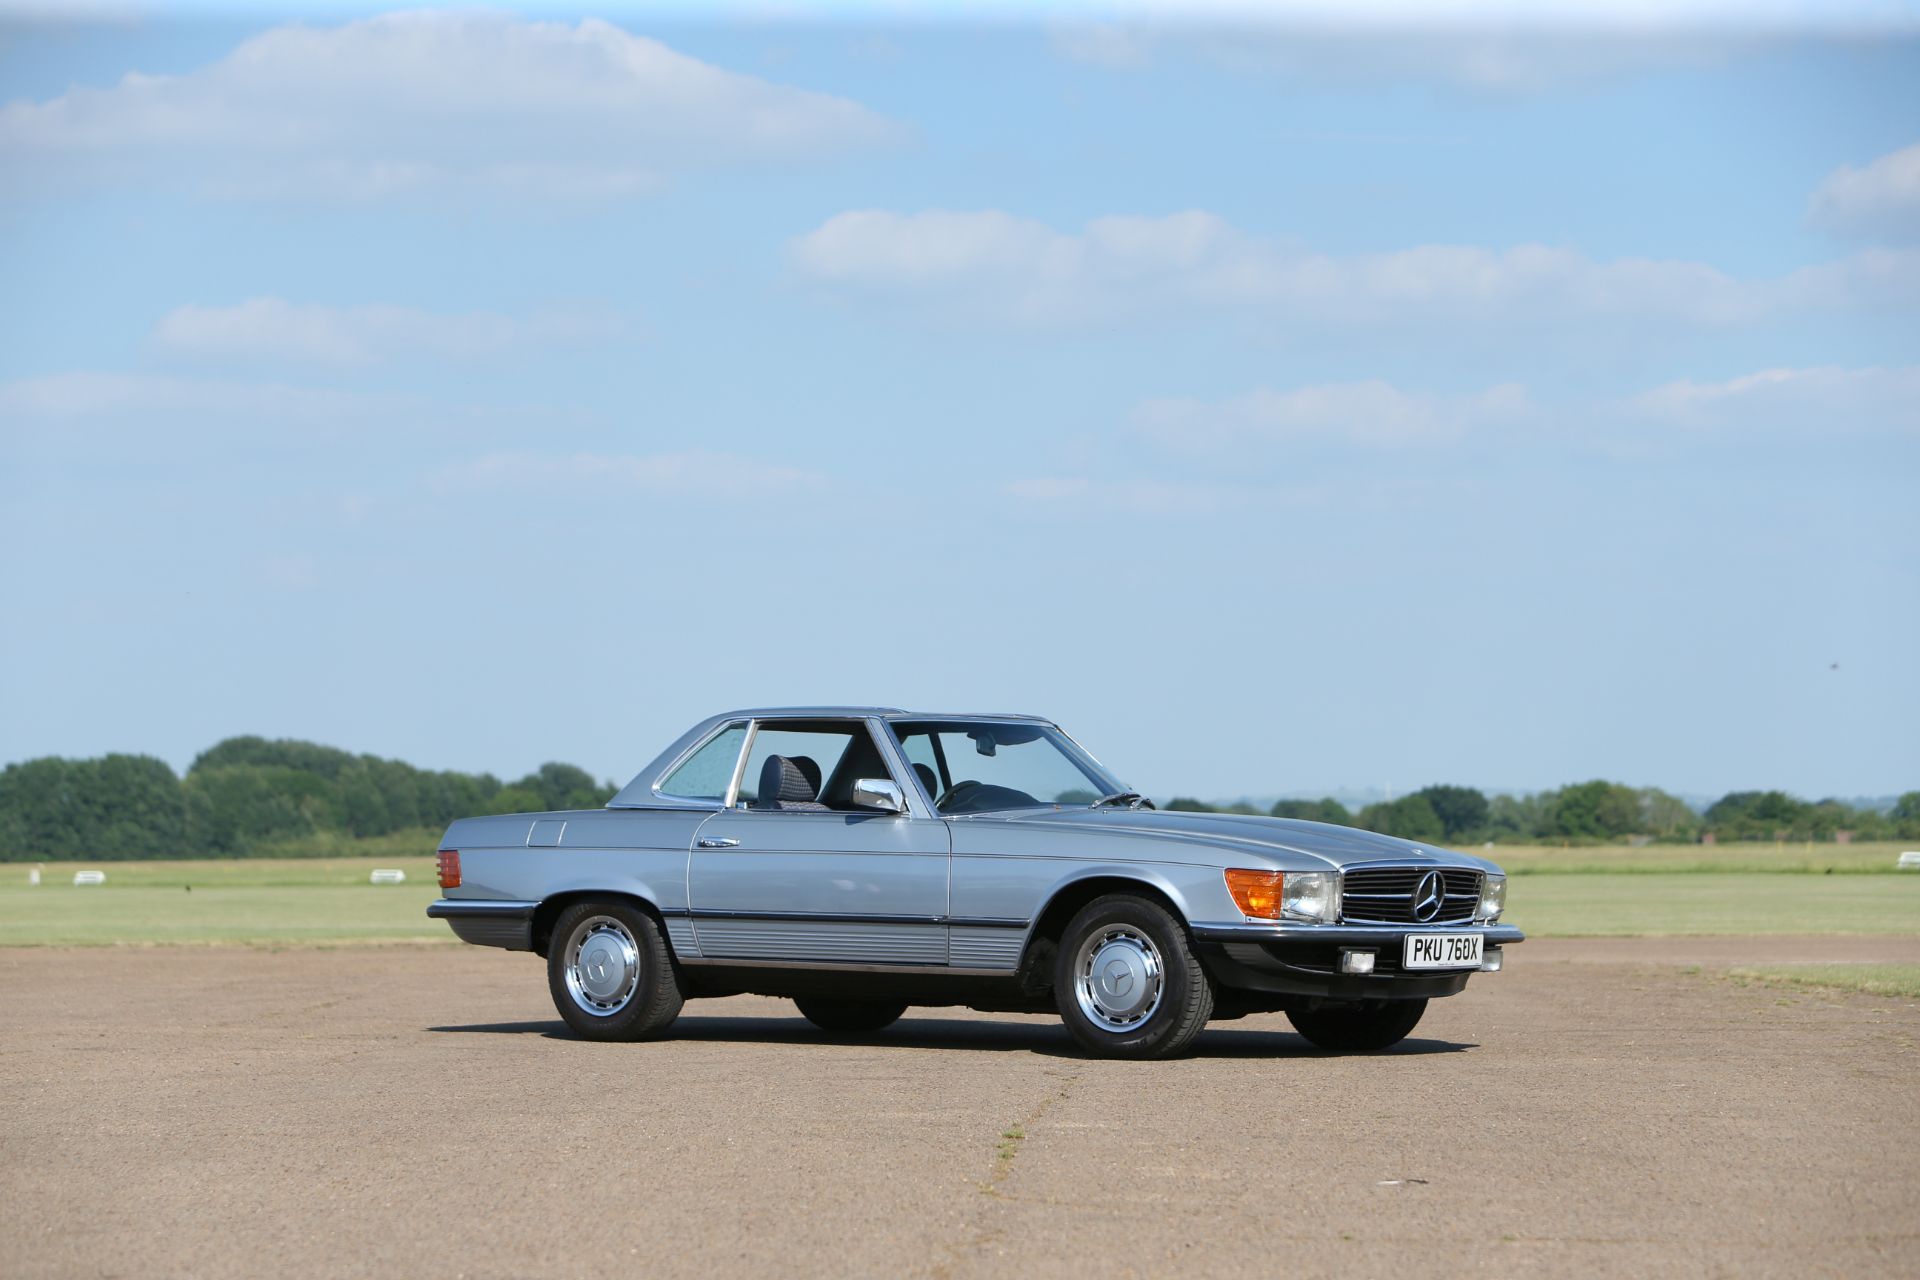 1988 Mercedes-Benz 280SL with Hardtop Chassis no. WDB10704222012947